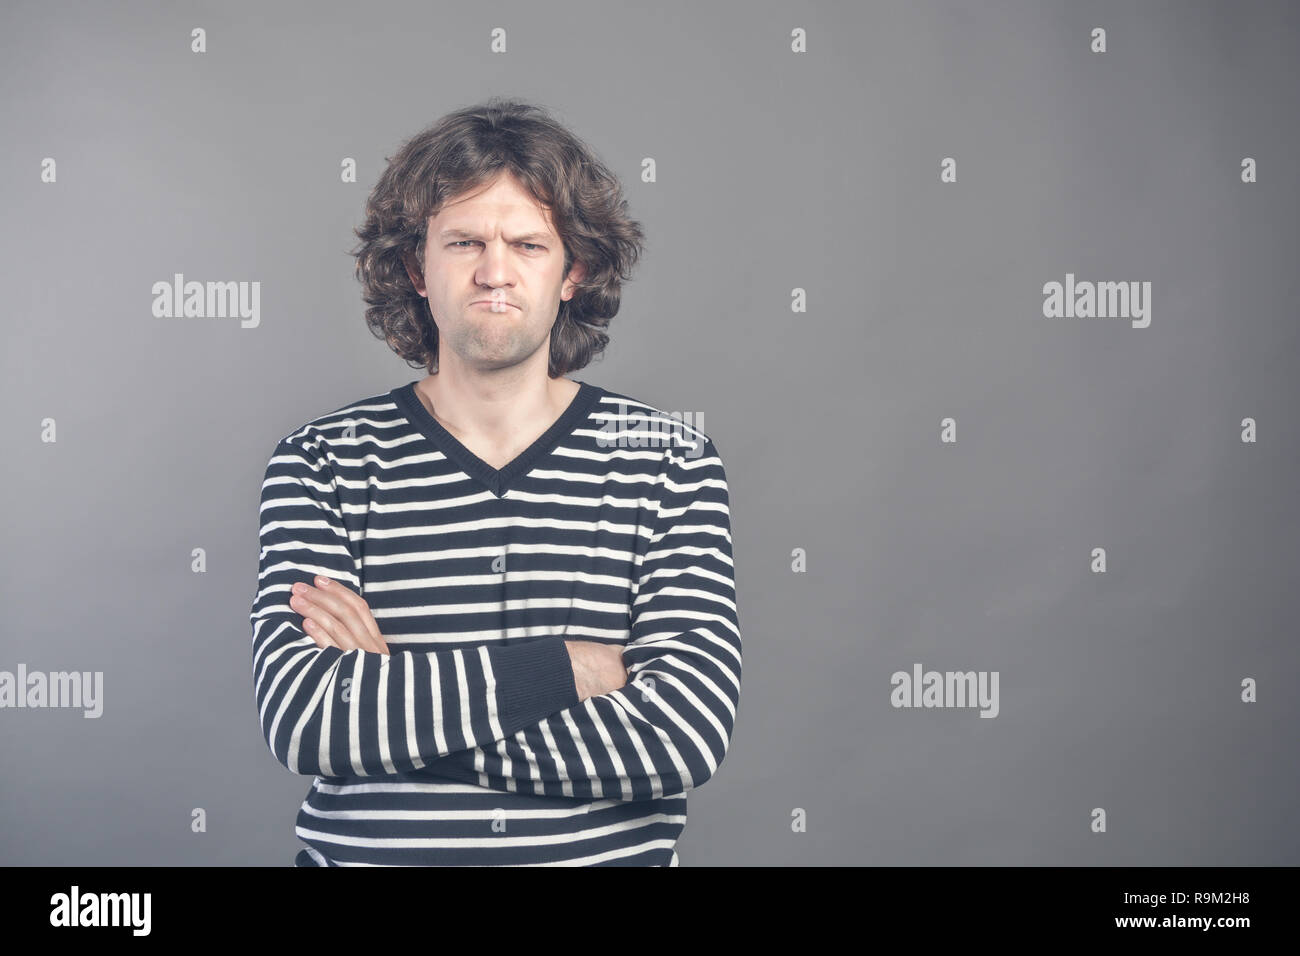 Closeup portrait of displeased, angry, grumpy man in striped sweater bad attitude, arms crossed, folded, looking at you, isolated gray background. Neg Stock Photo